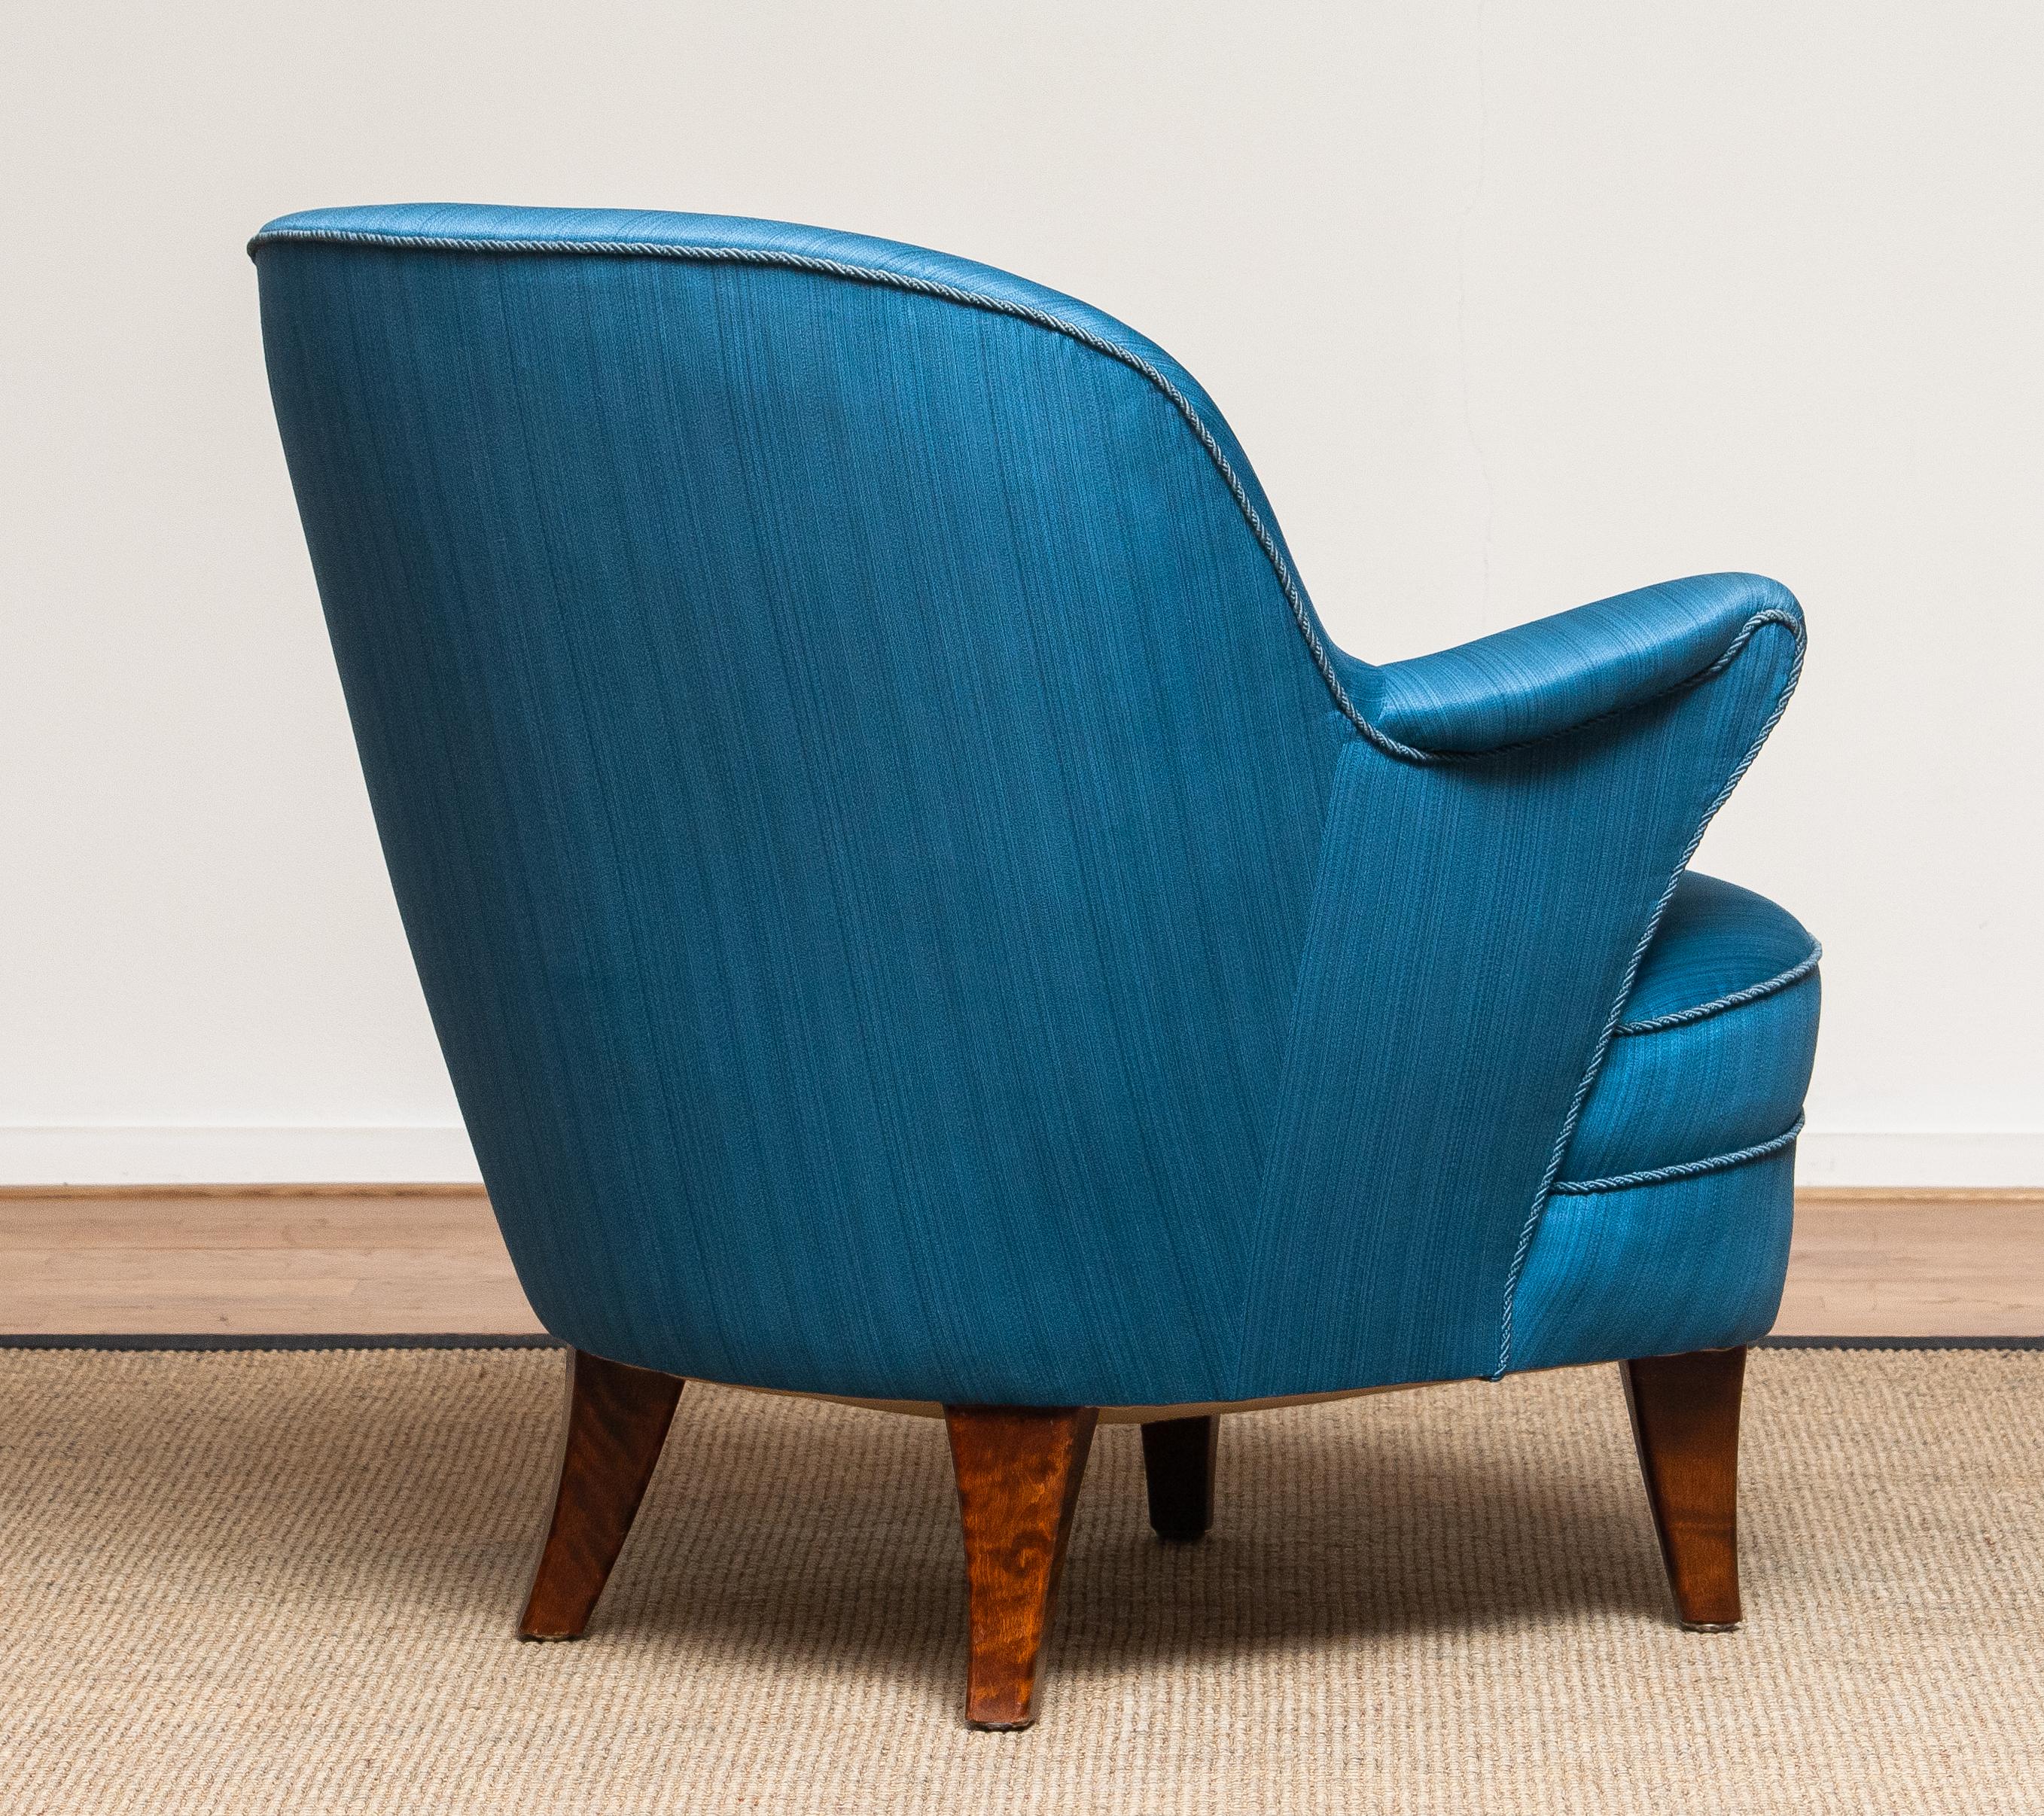 1950s chair styles